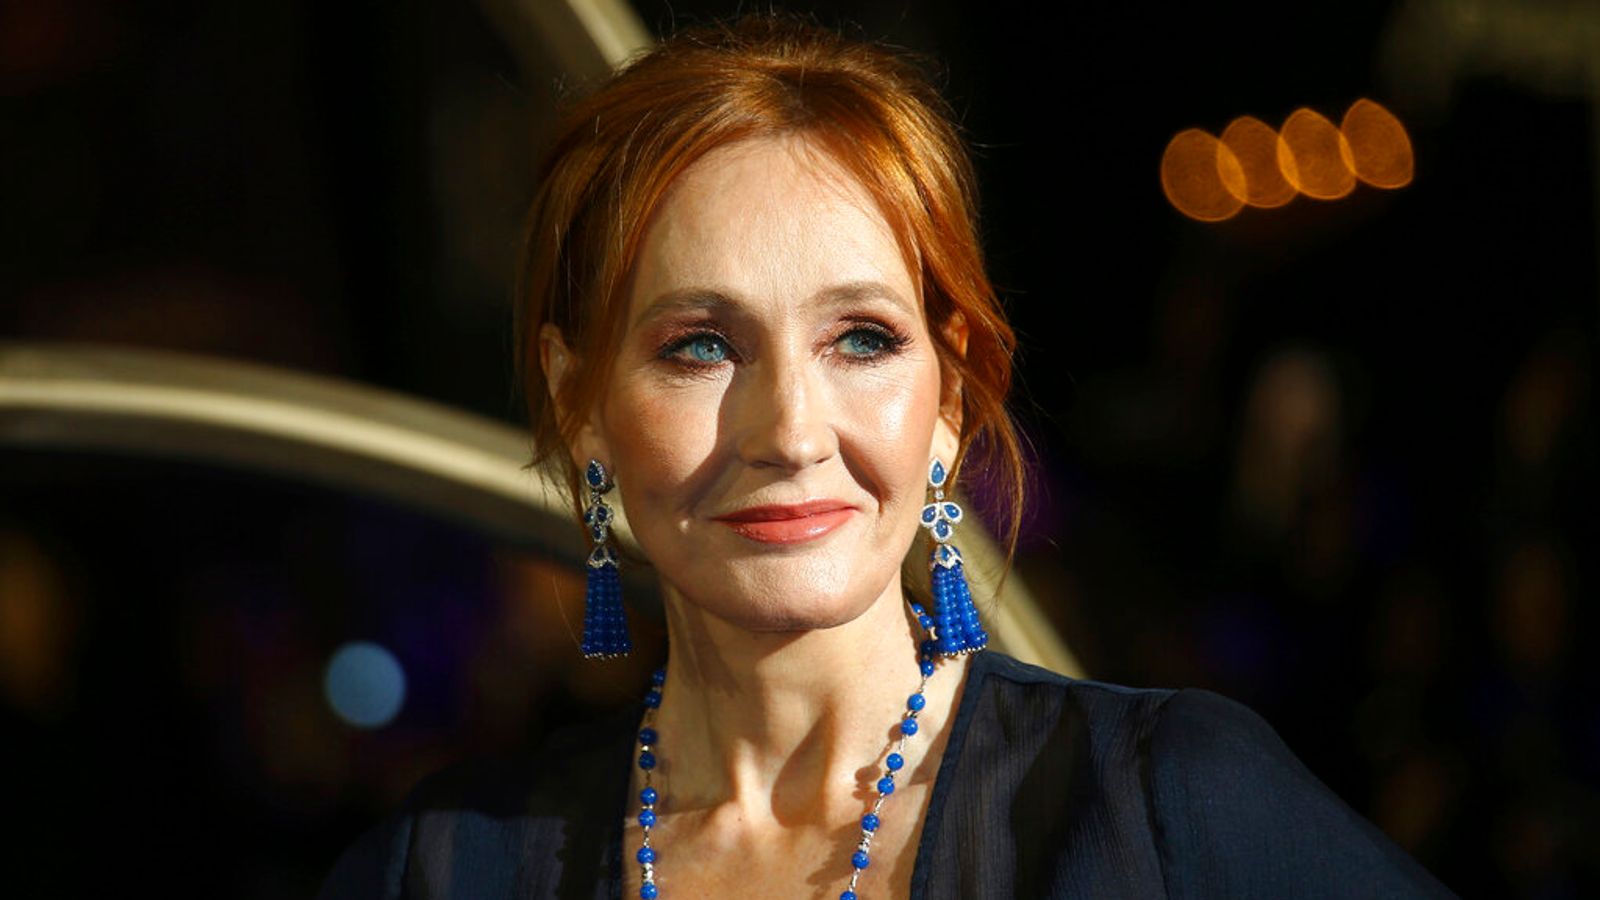 JK Rowling references removed from Seattle museum after blog post condemns 'hateful' views on gender identity